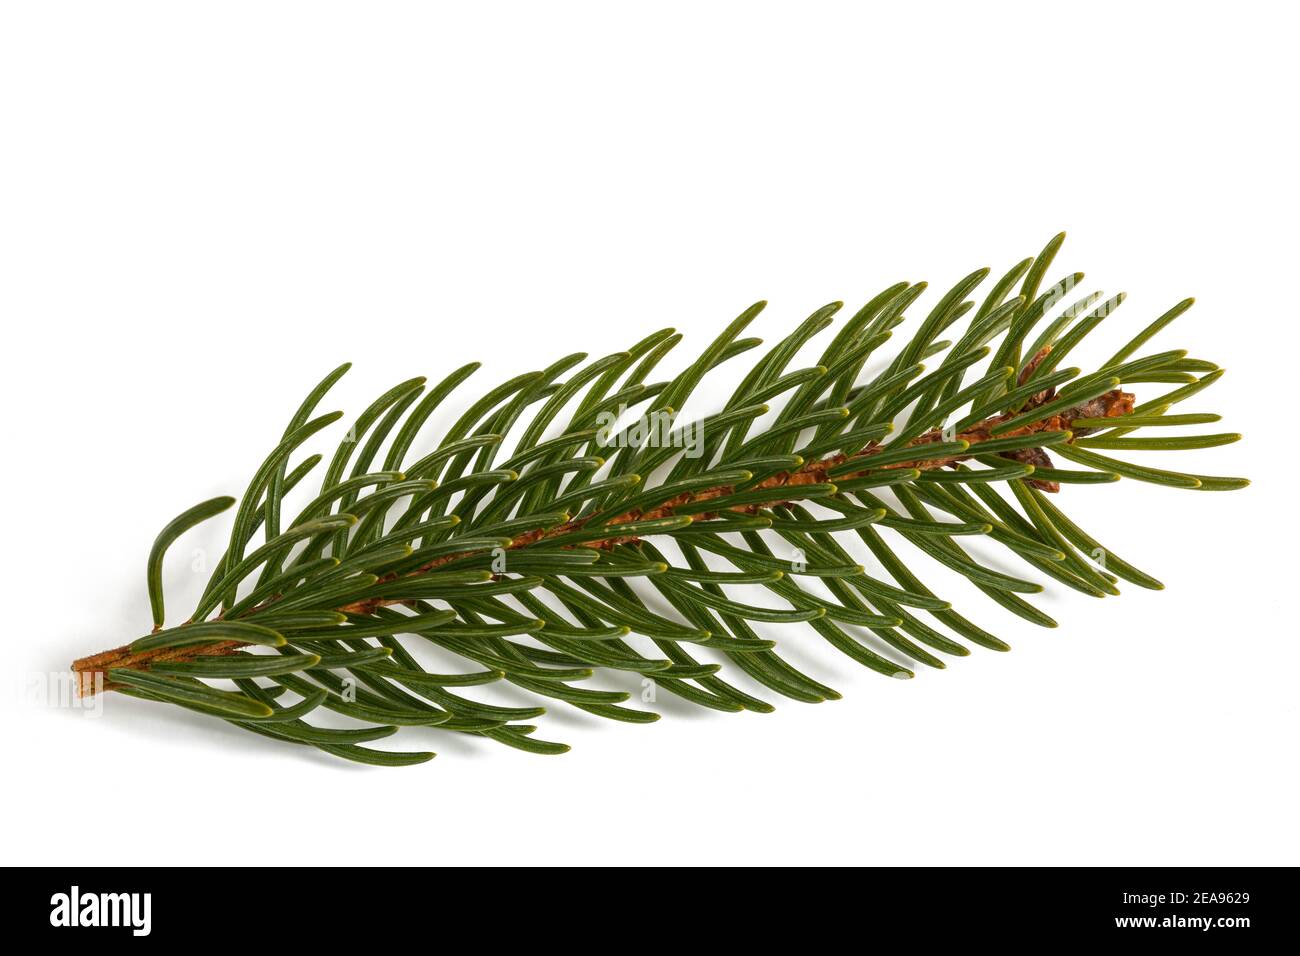 Spruce branch   isolated on white background Stock Photo